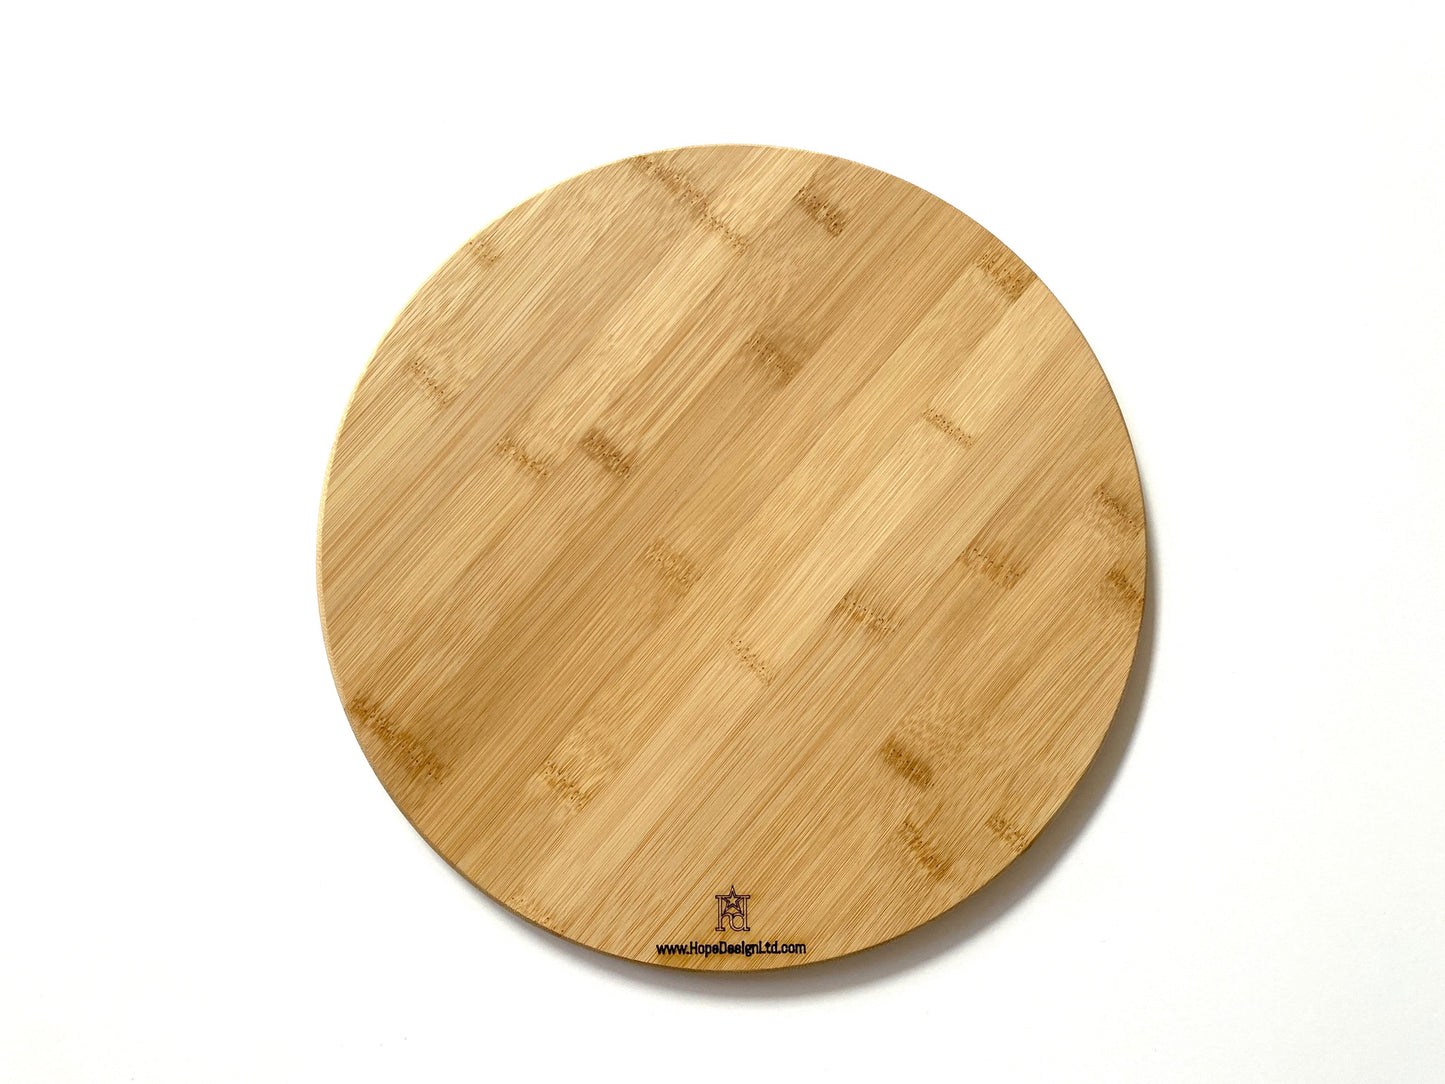 Initial with Year Established Round Cutting Board